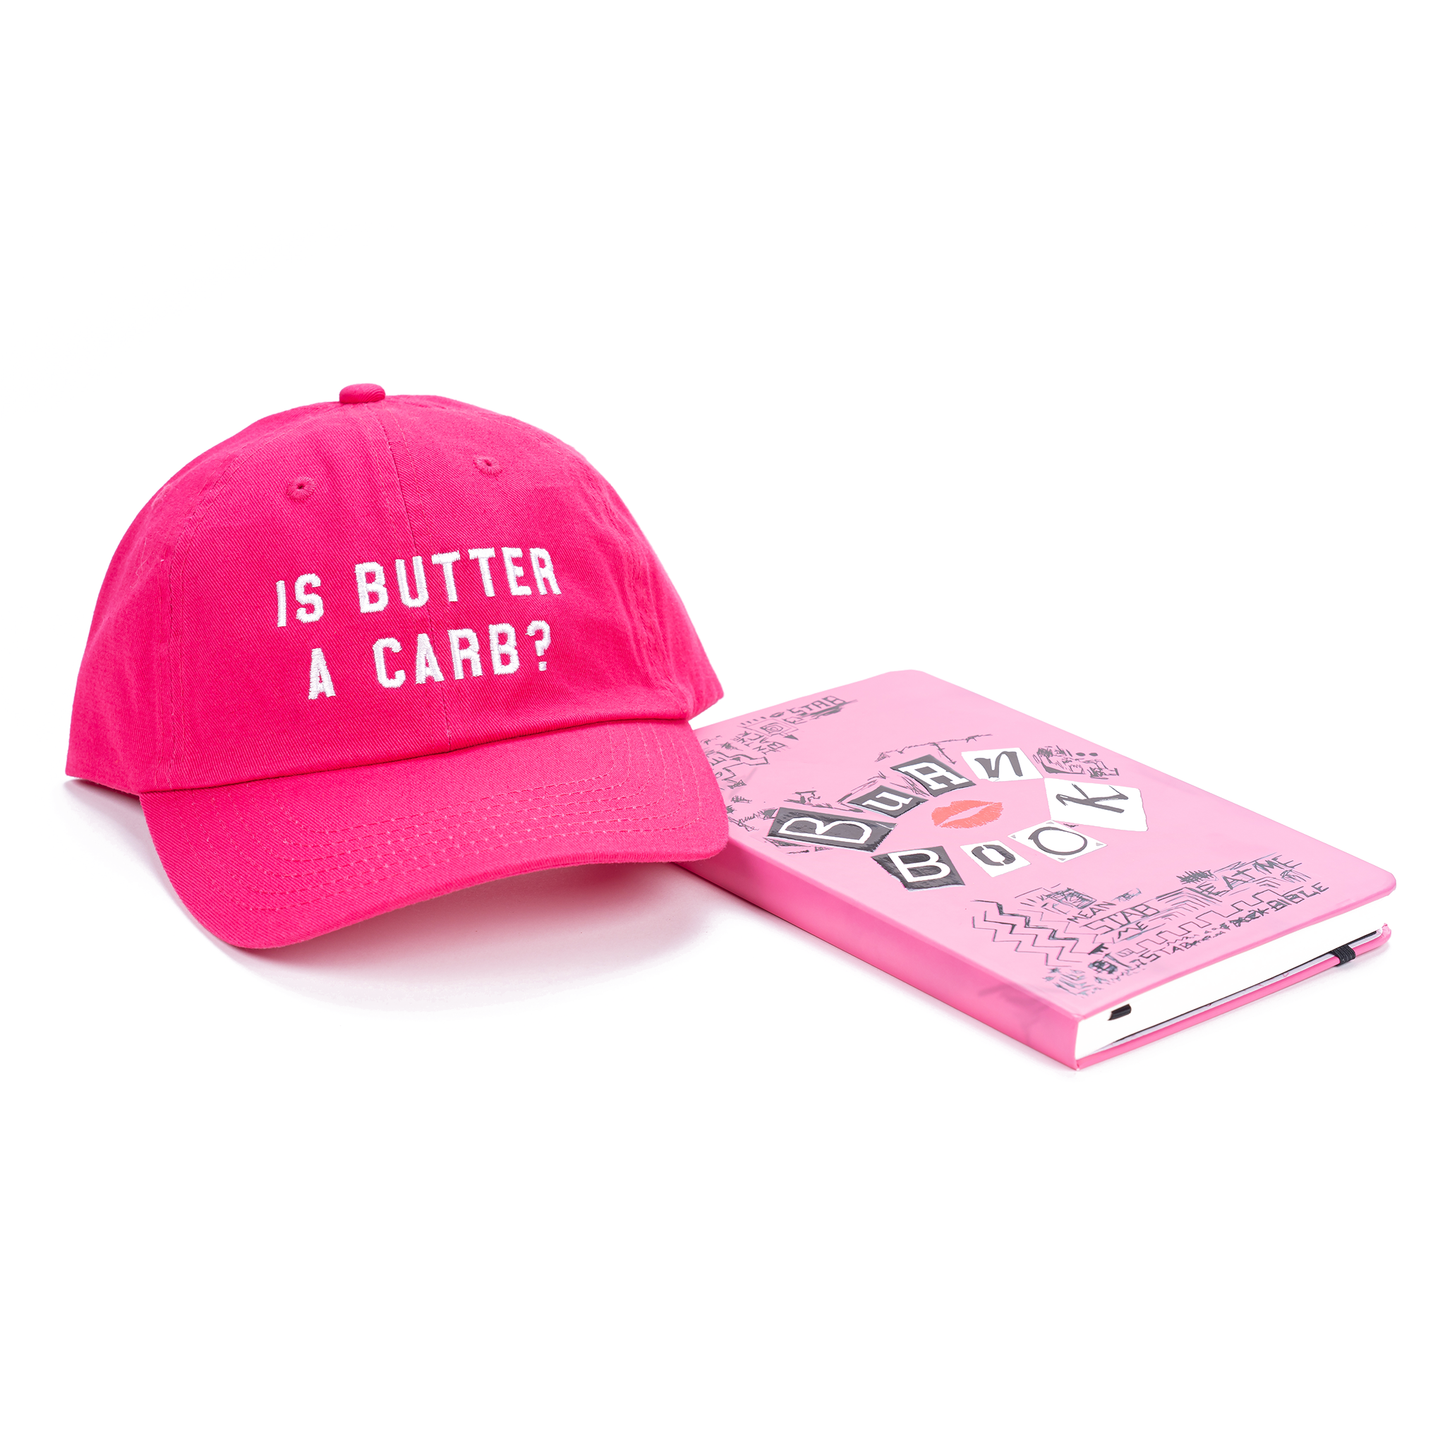 Is butter a carb? (White) - Baseball Hat (Hot Pink)